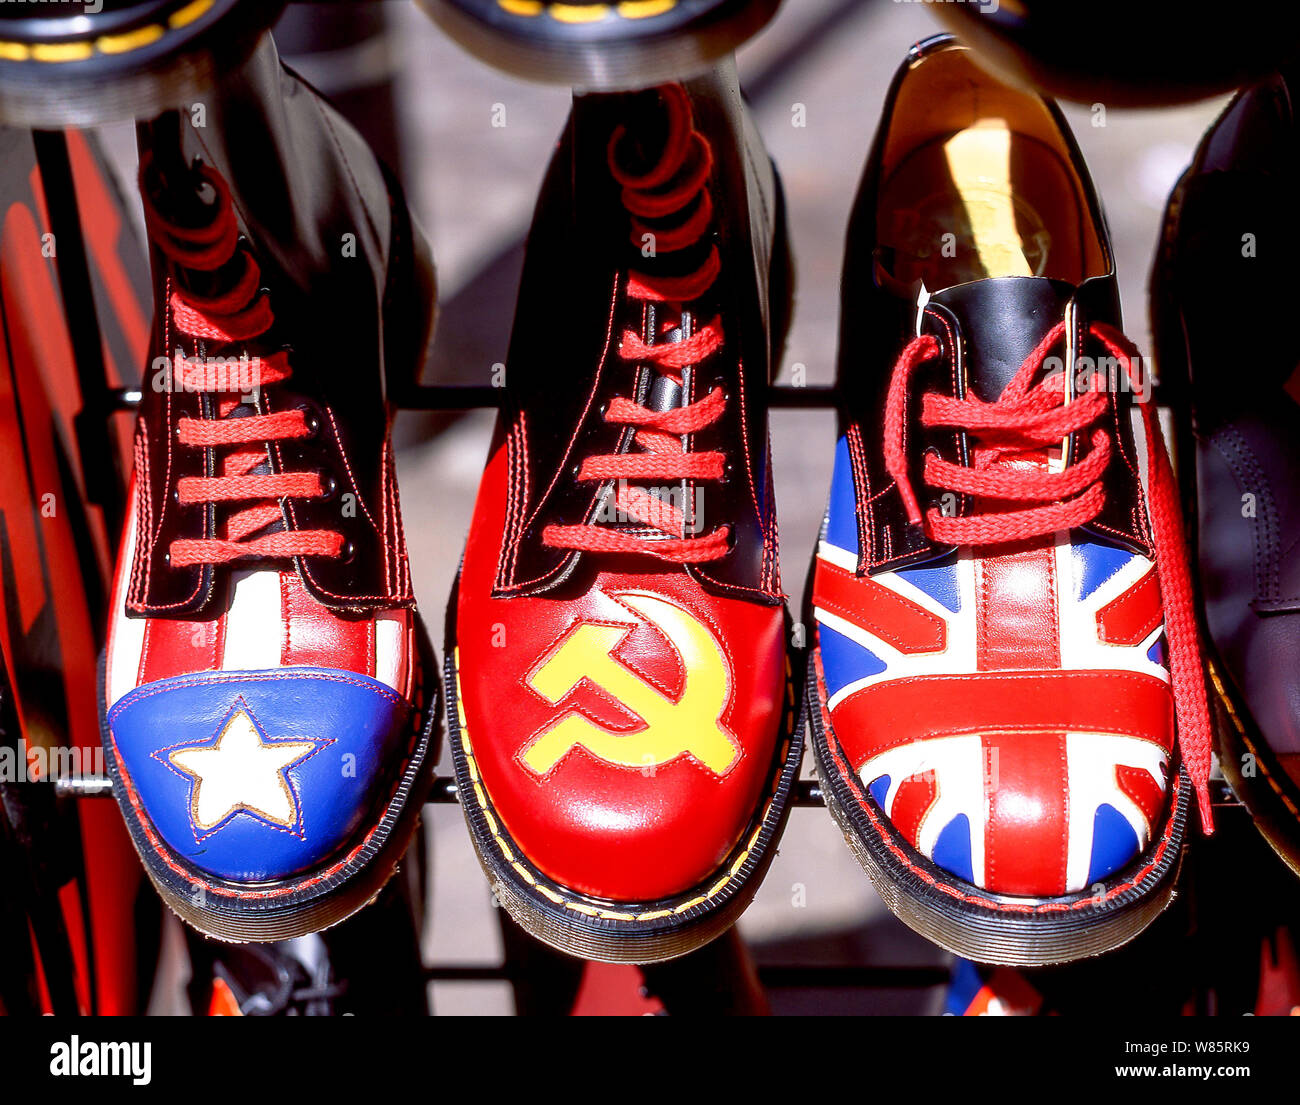 Doc Martens chaussures le décrochage, Carnaby Street, Soho, City of westminster, Greater London, Angleterre, Royaume-Uni Banque D'Images